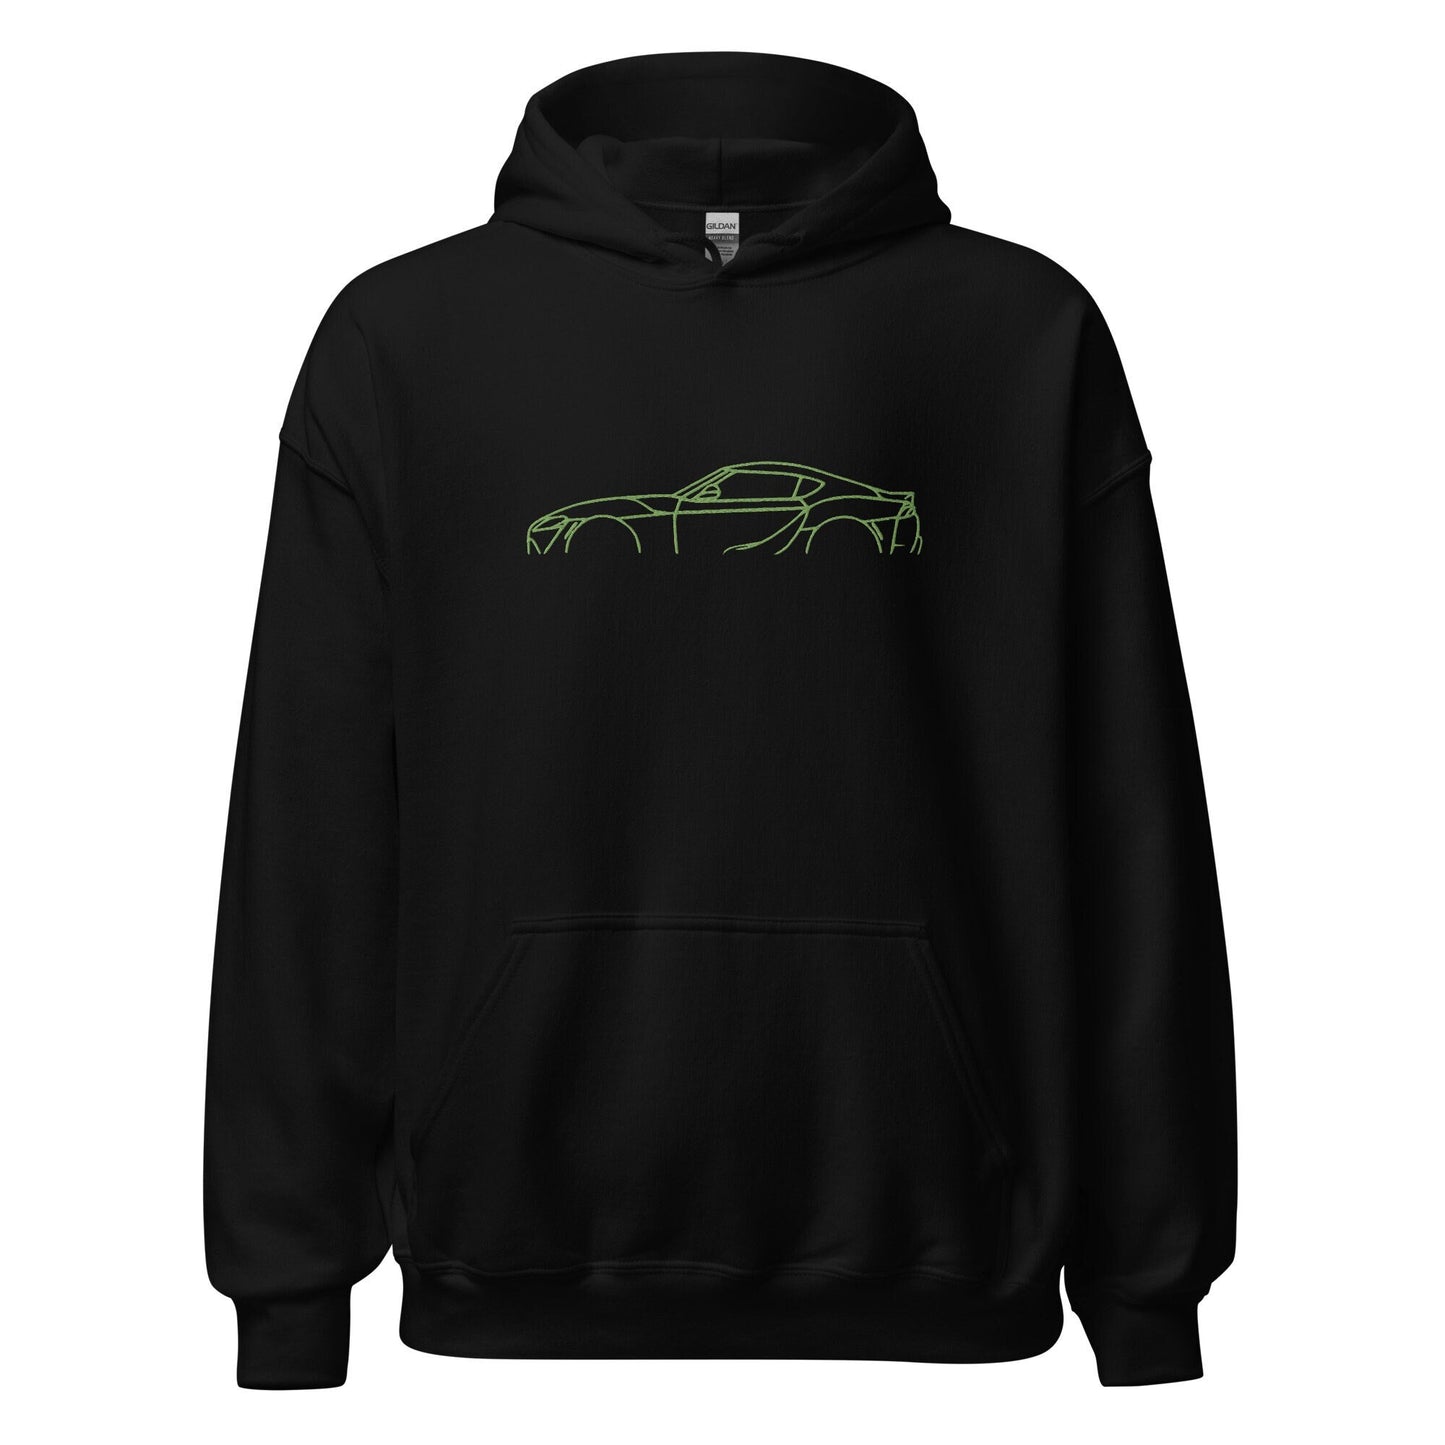 Customizable, Embroidered Supra Mk5 Car Silhouette Hoodie, JDM Hoodie, Perfect Gift Idea